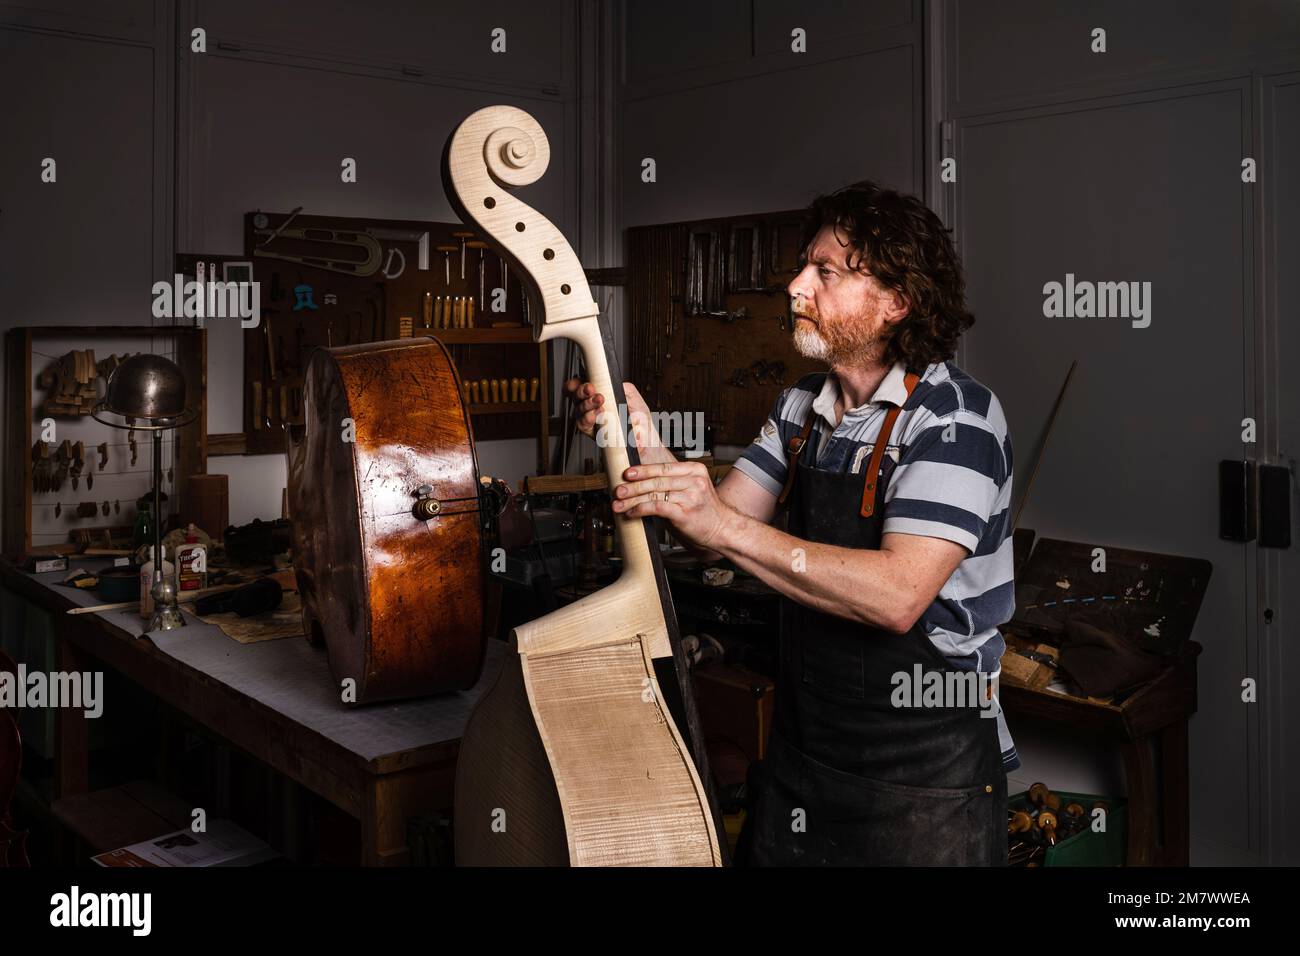 Troyes (north-eastern France): Laurent Demeyere, stringed instrument maker specialized in double bass. Here, making a double bass. Gestures Stock Photo